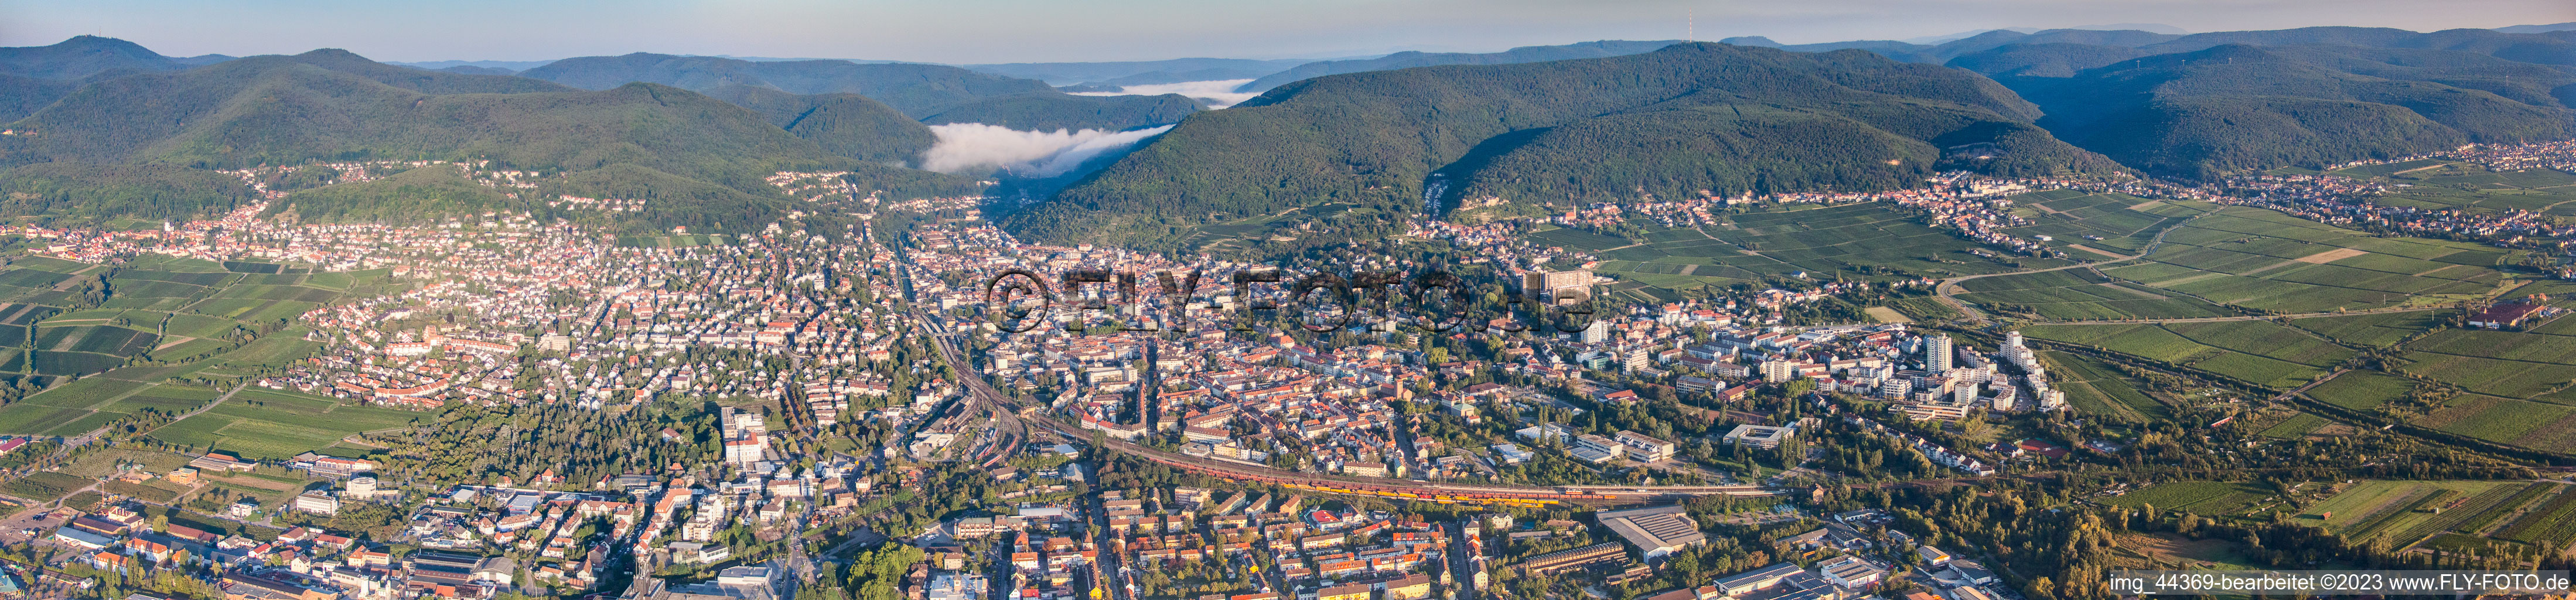 Aerial photograpy of Panorama in Neustadt an der Weinstraße in the state Rhineland-Palatinate, Germany